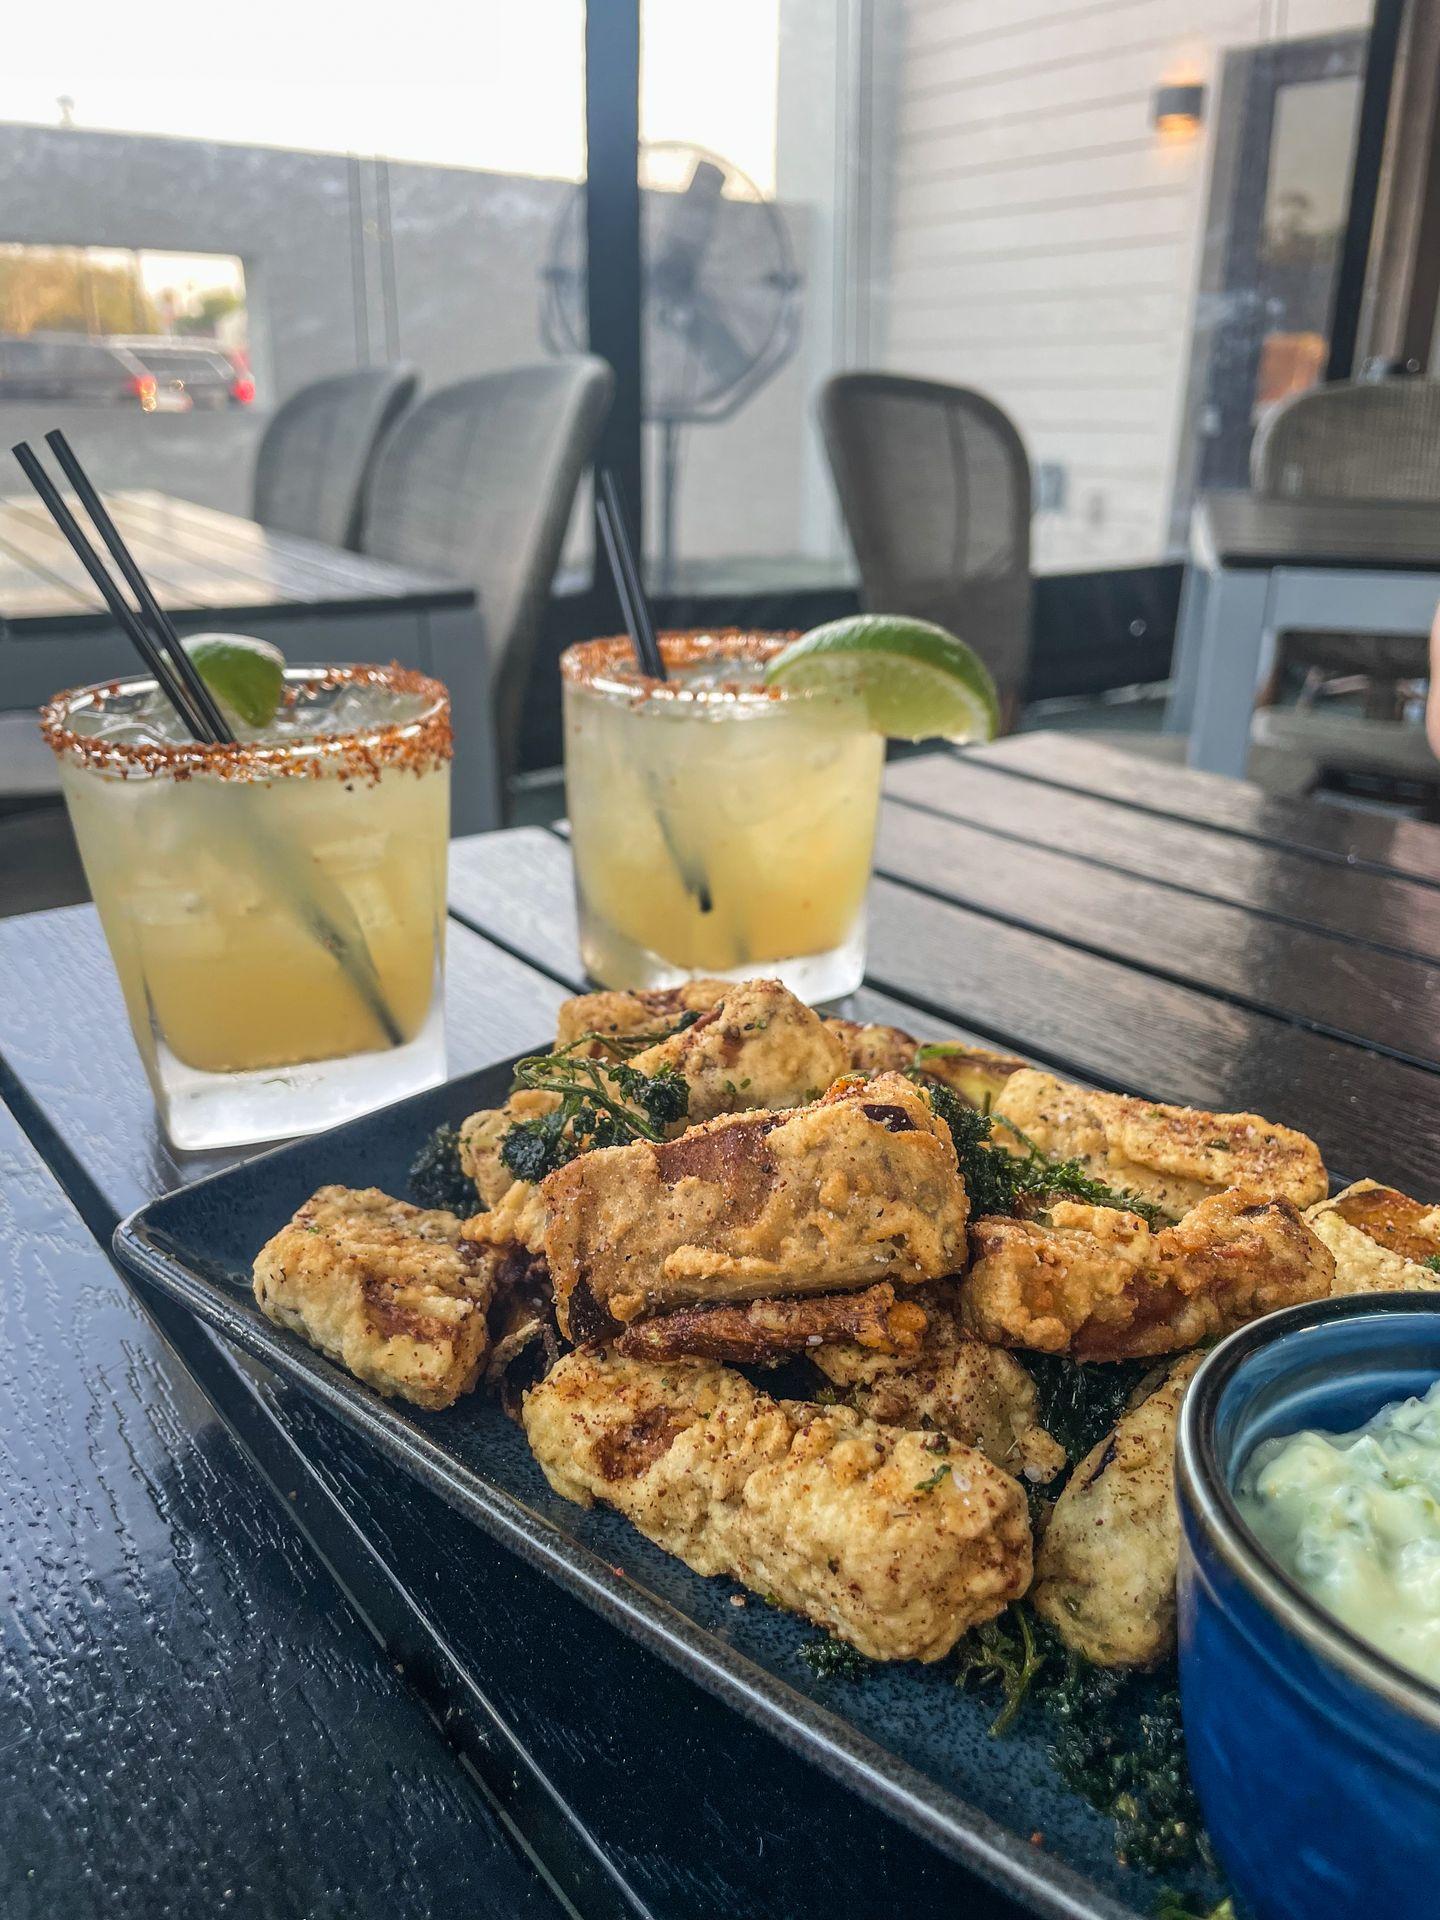 Two margarita's next to an appetizer of fried eggplant and artichokes.